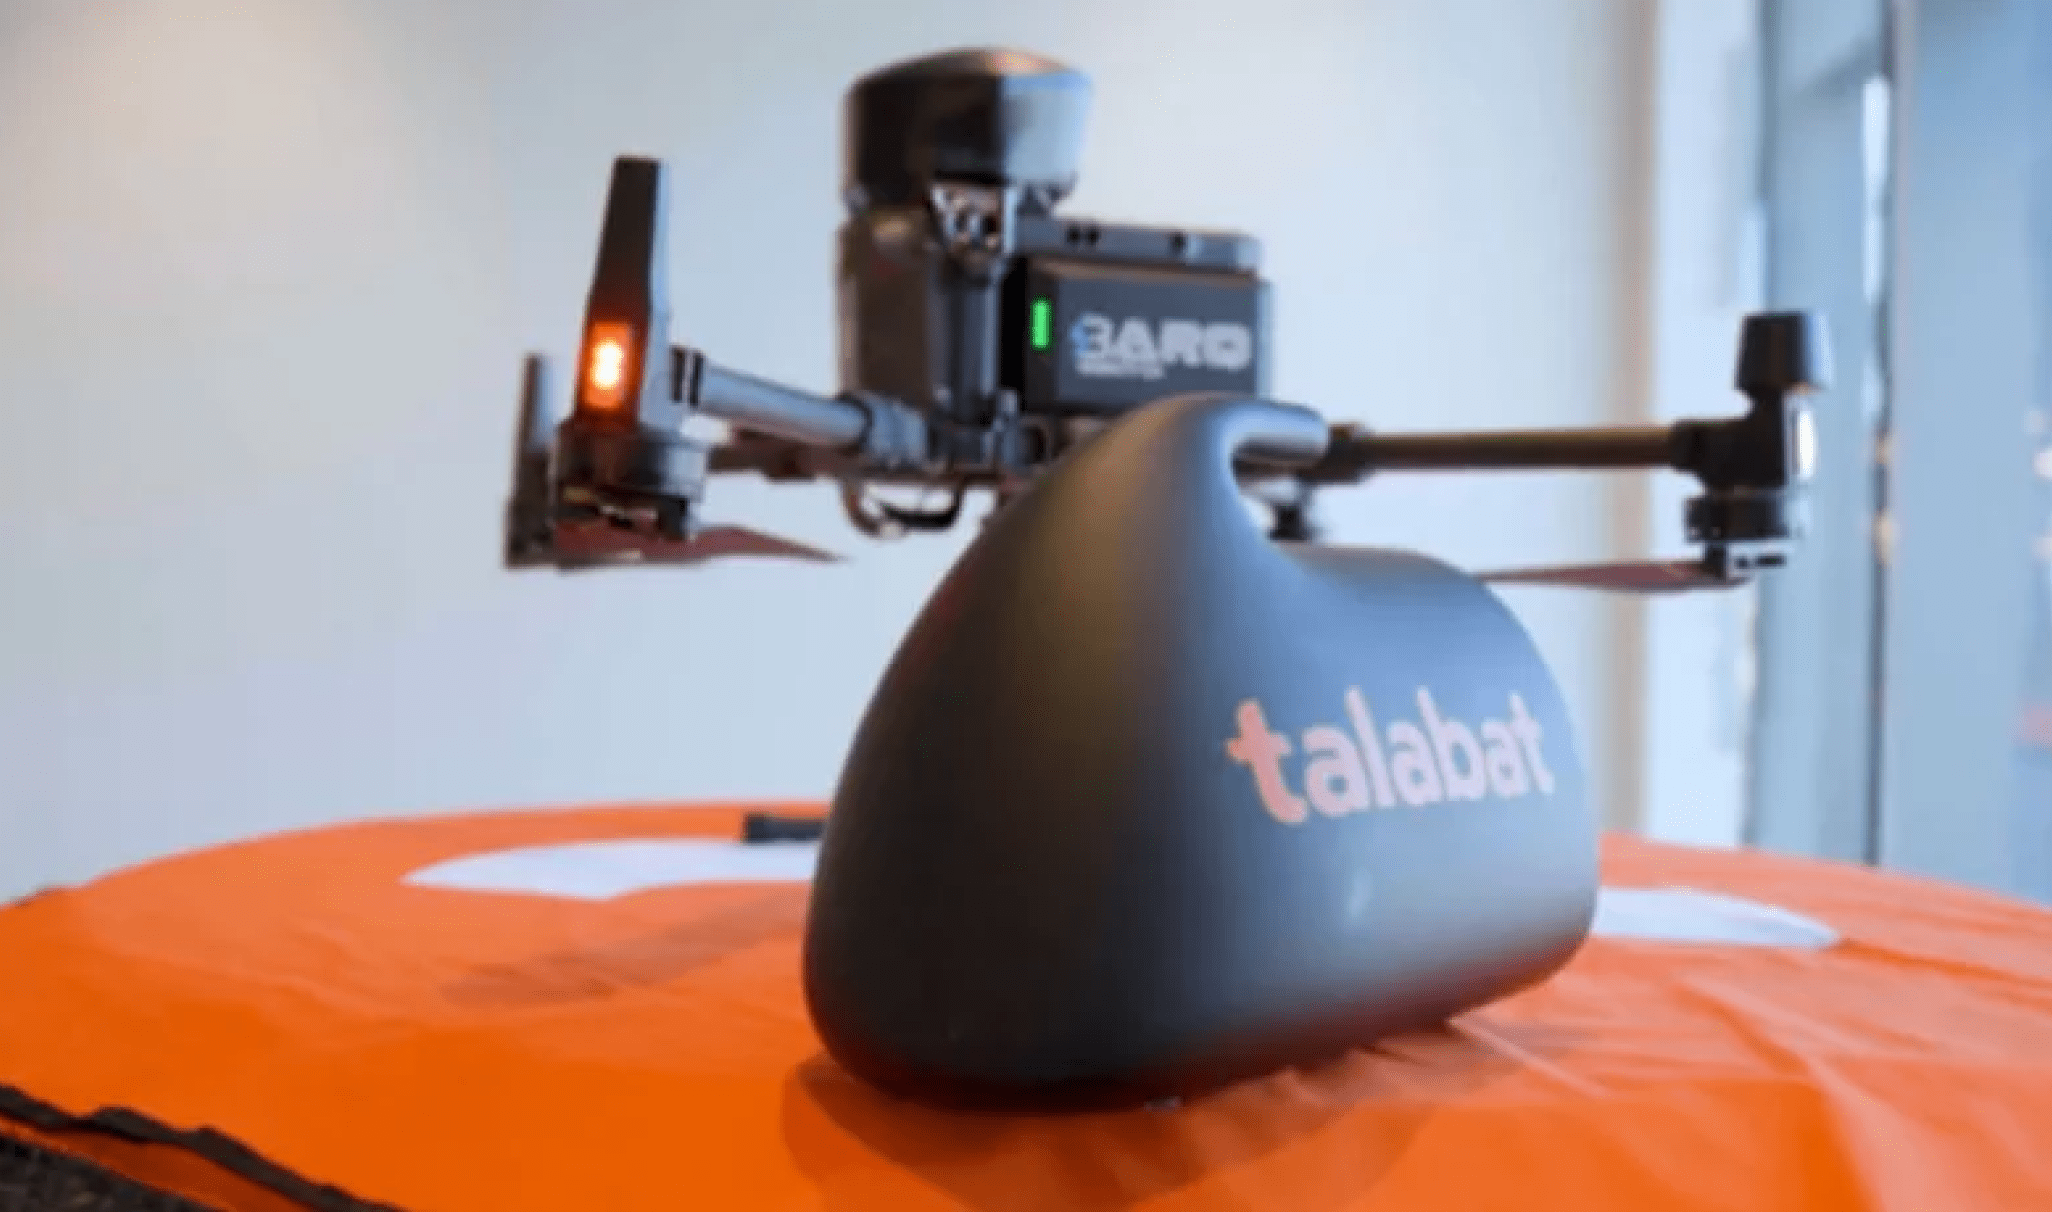 Food ordering in the Middle East with drones